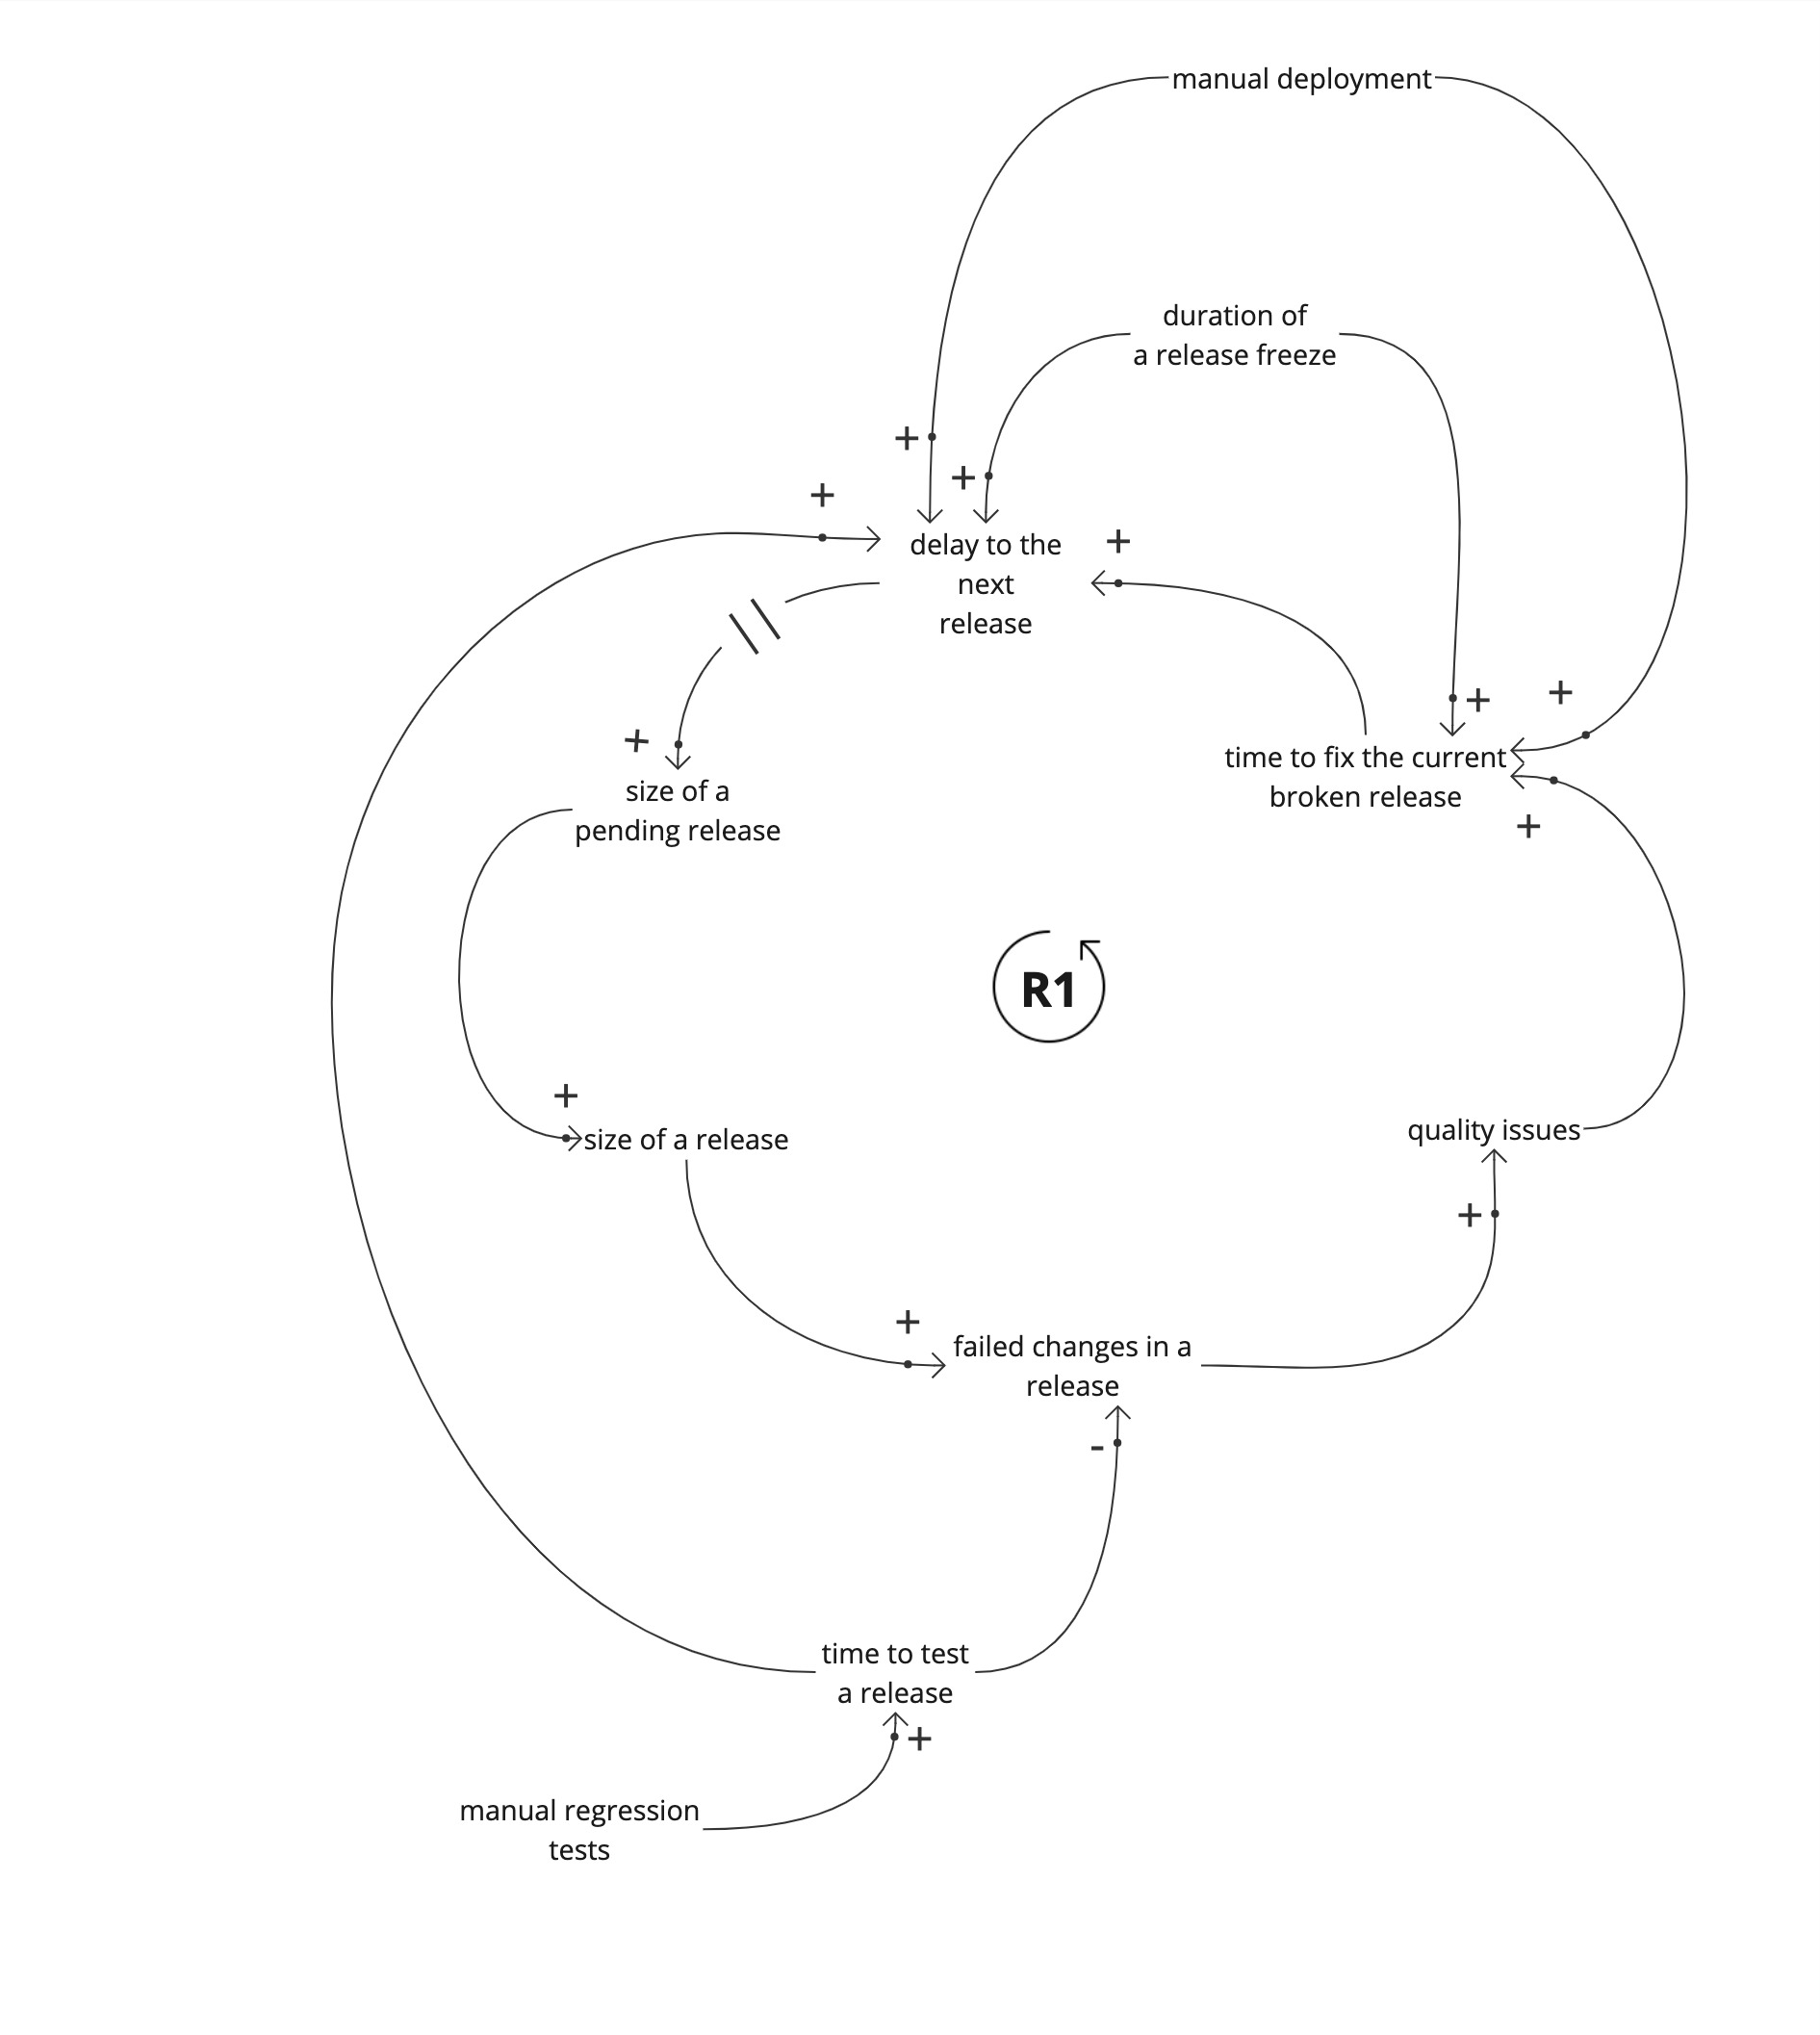 Casual Loop Diagram driving worsening quality and contributing factors